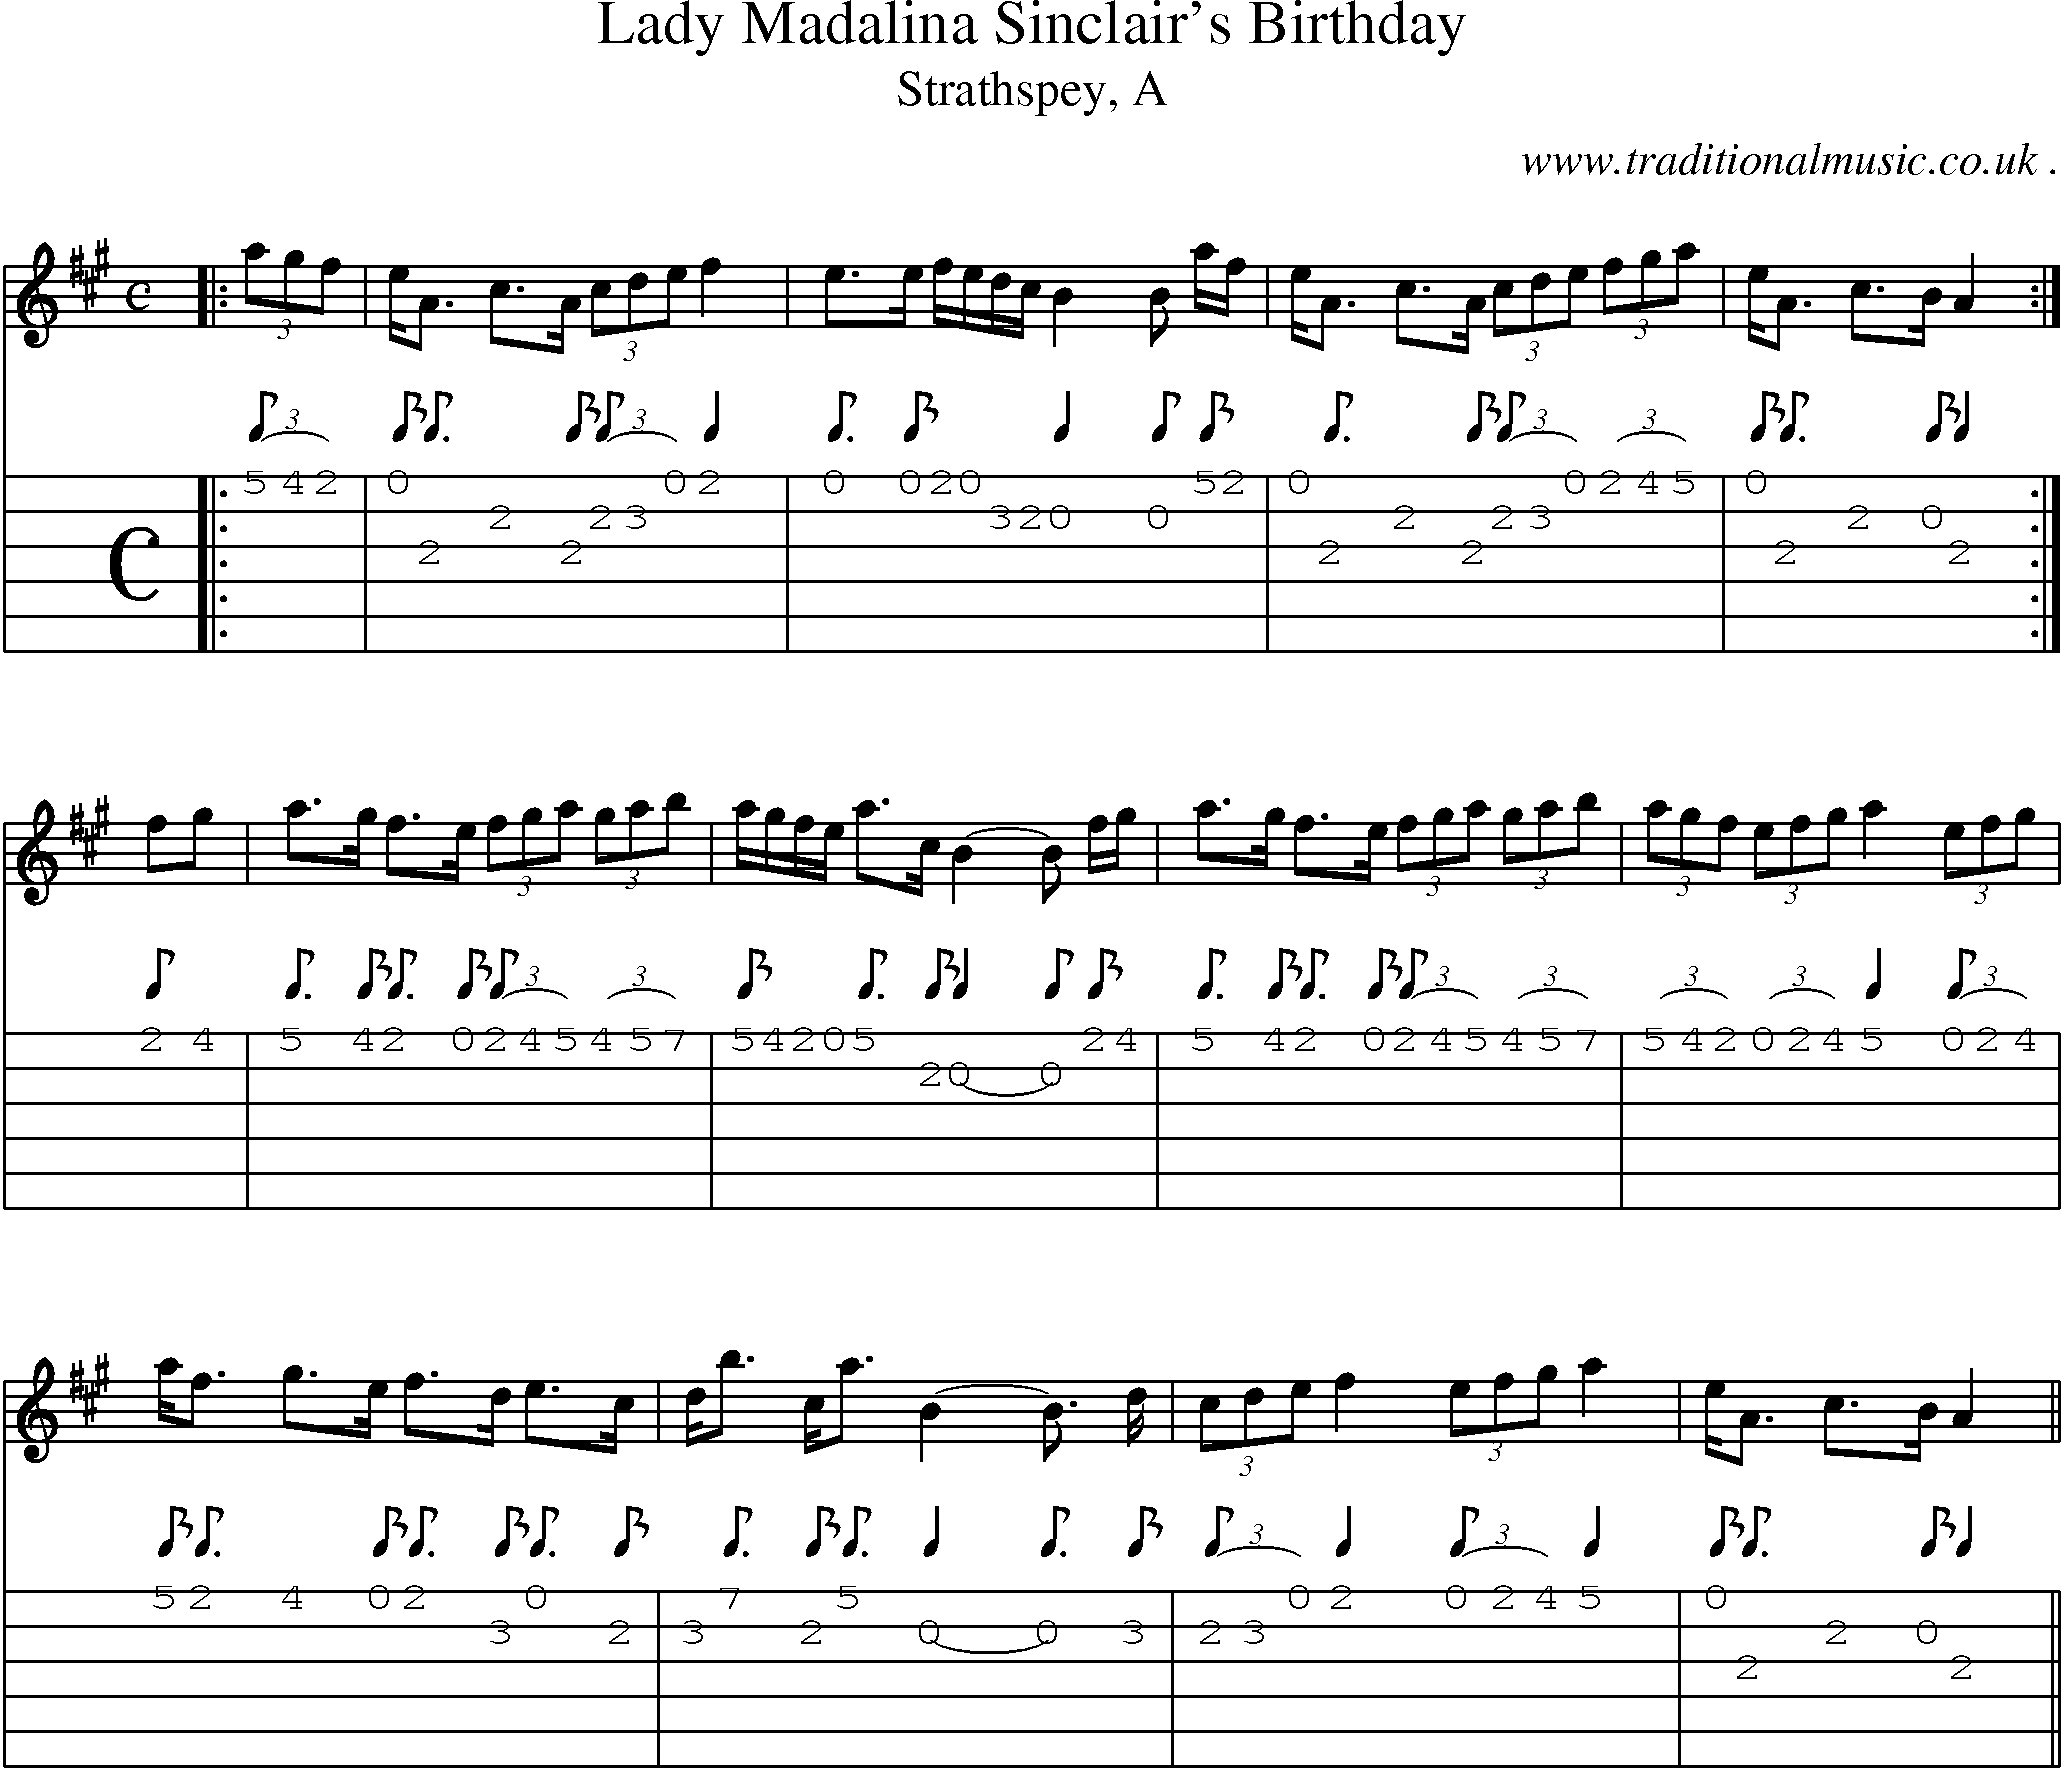 Sheet-music  score, Chords and Guitar Tabs for Lady Madalina Sinclairs Birthday